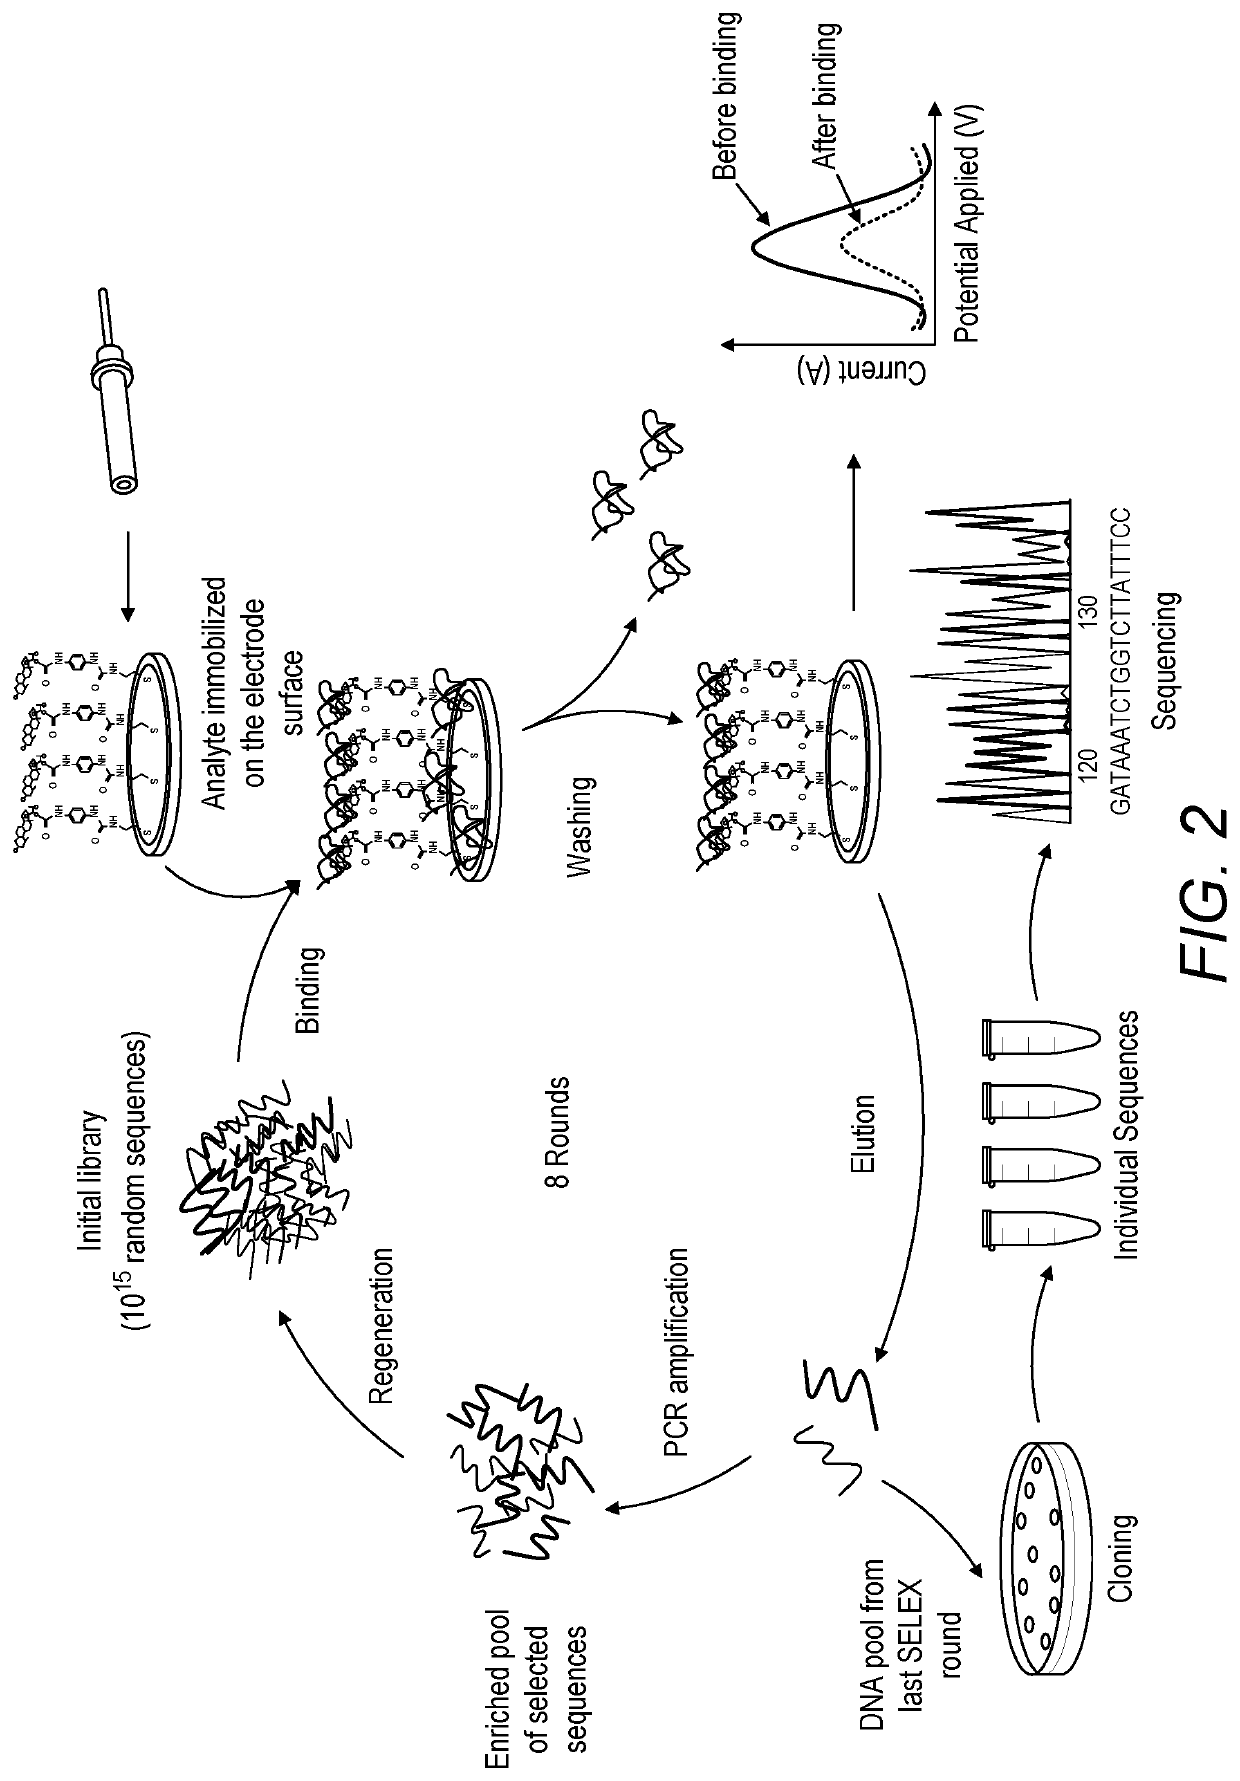 Electrochemical screening for the selection of DNA aptamers